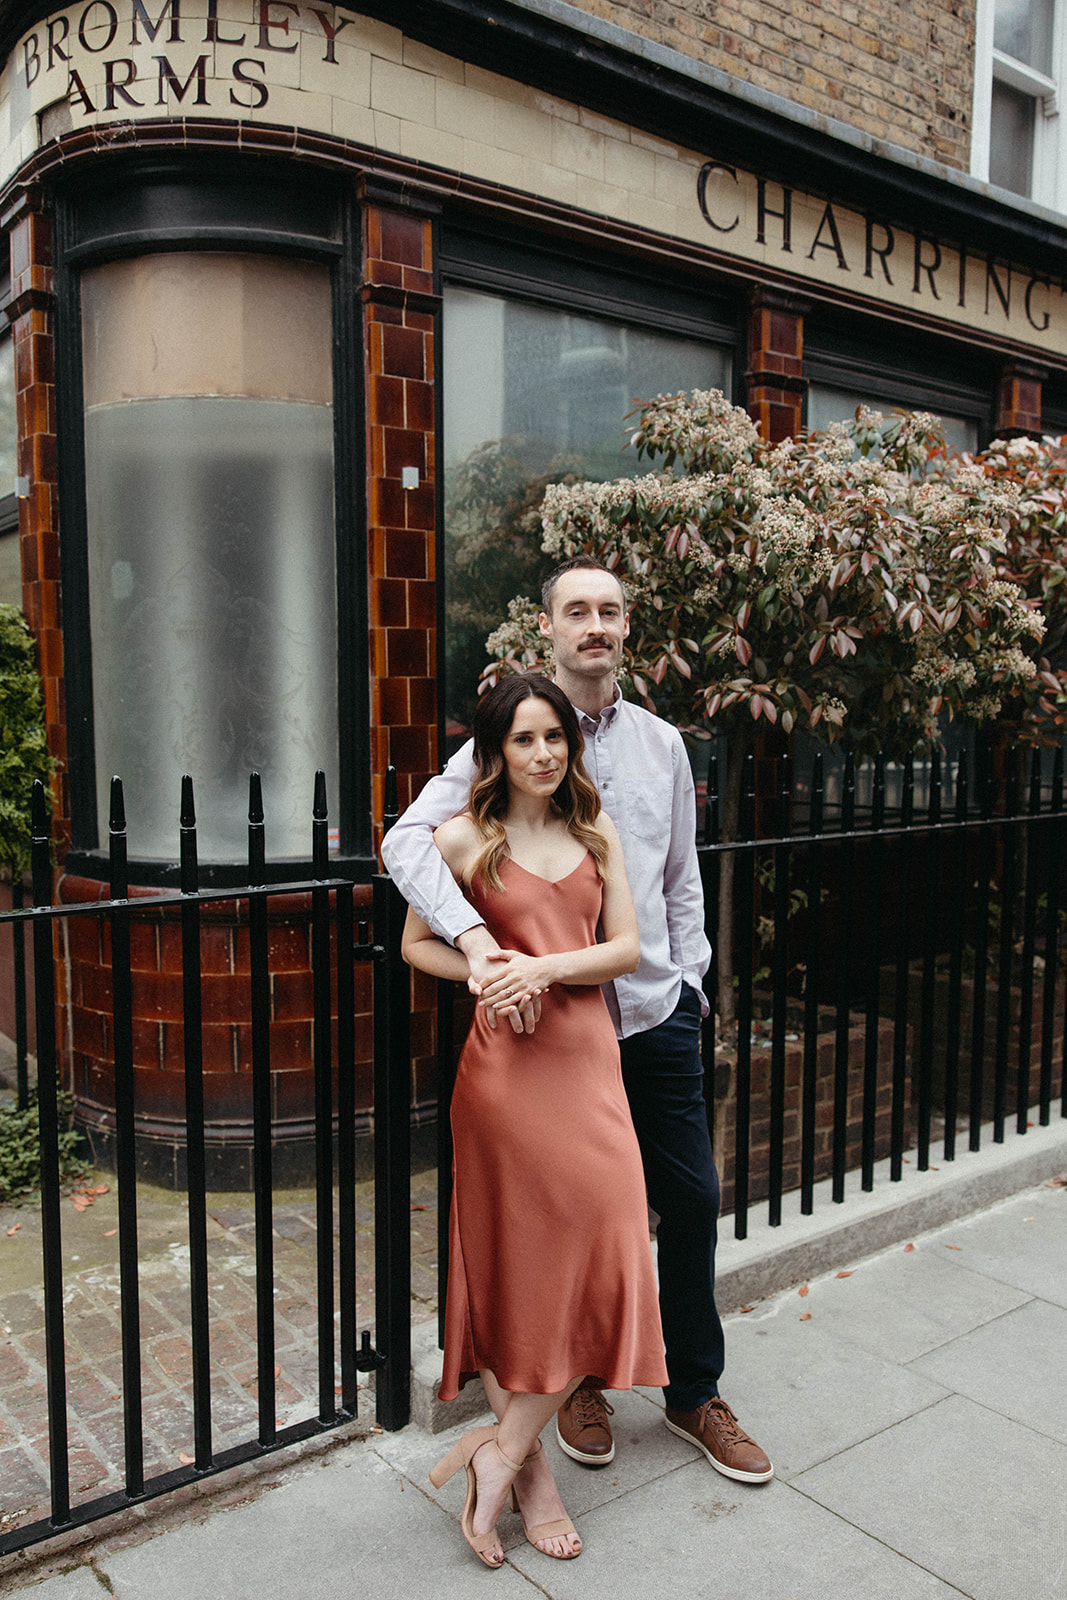 A city couple embraces in front of Charrington's Fine Ales And Stout during their old money aesthetic engagement session